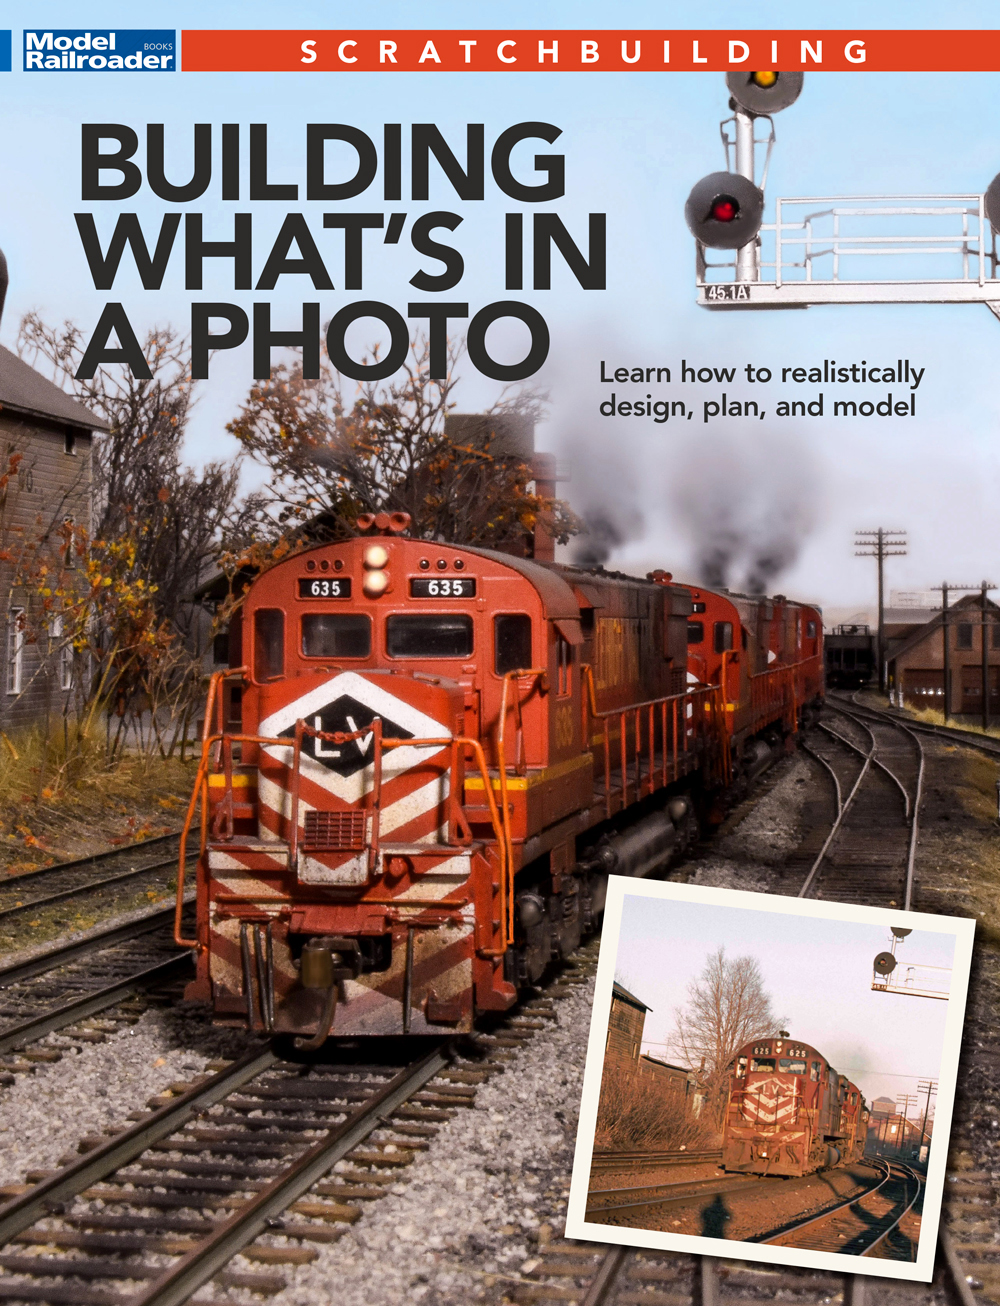 Cover image of book with locomotives leading a train on a scenicked model railroad with a photo of the prototype scene at lower right.